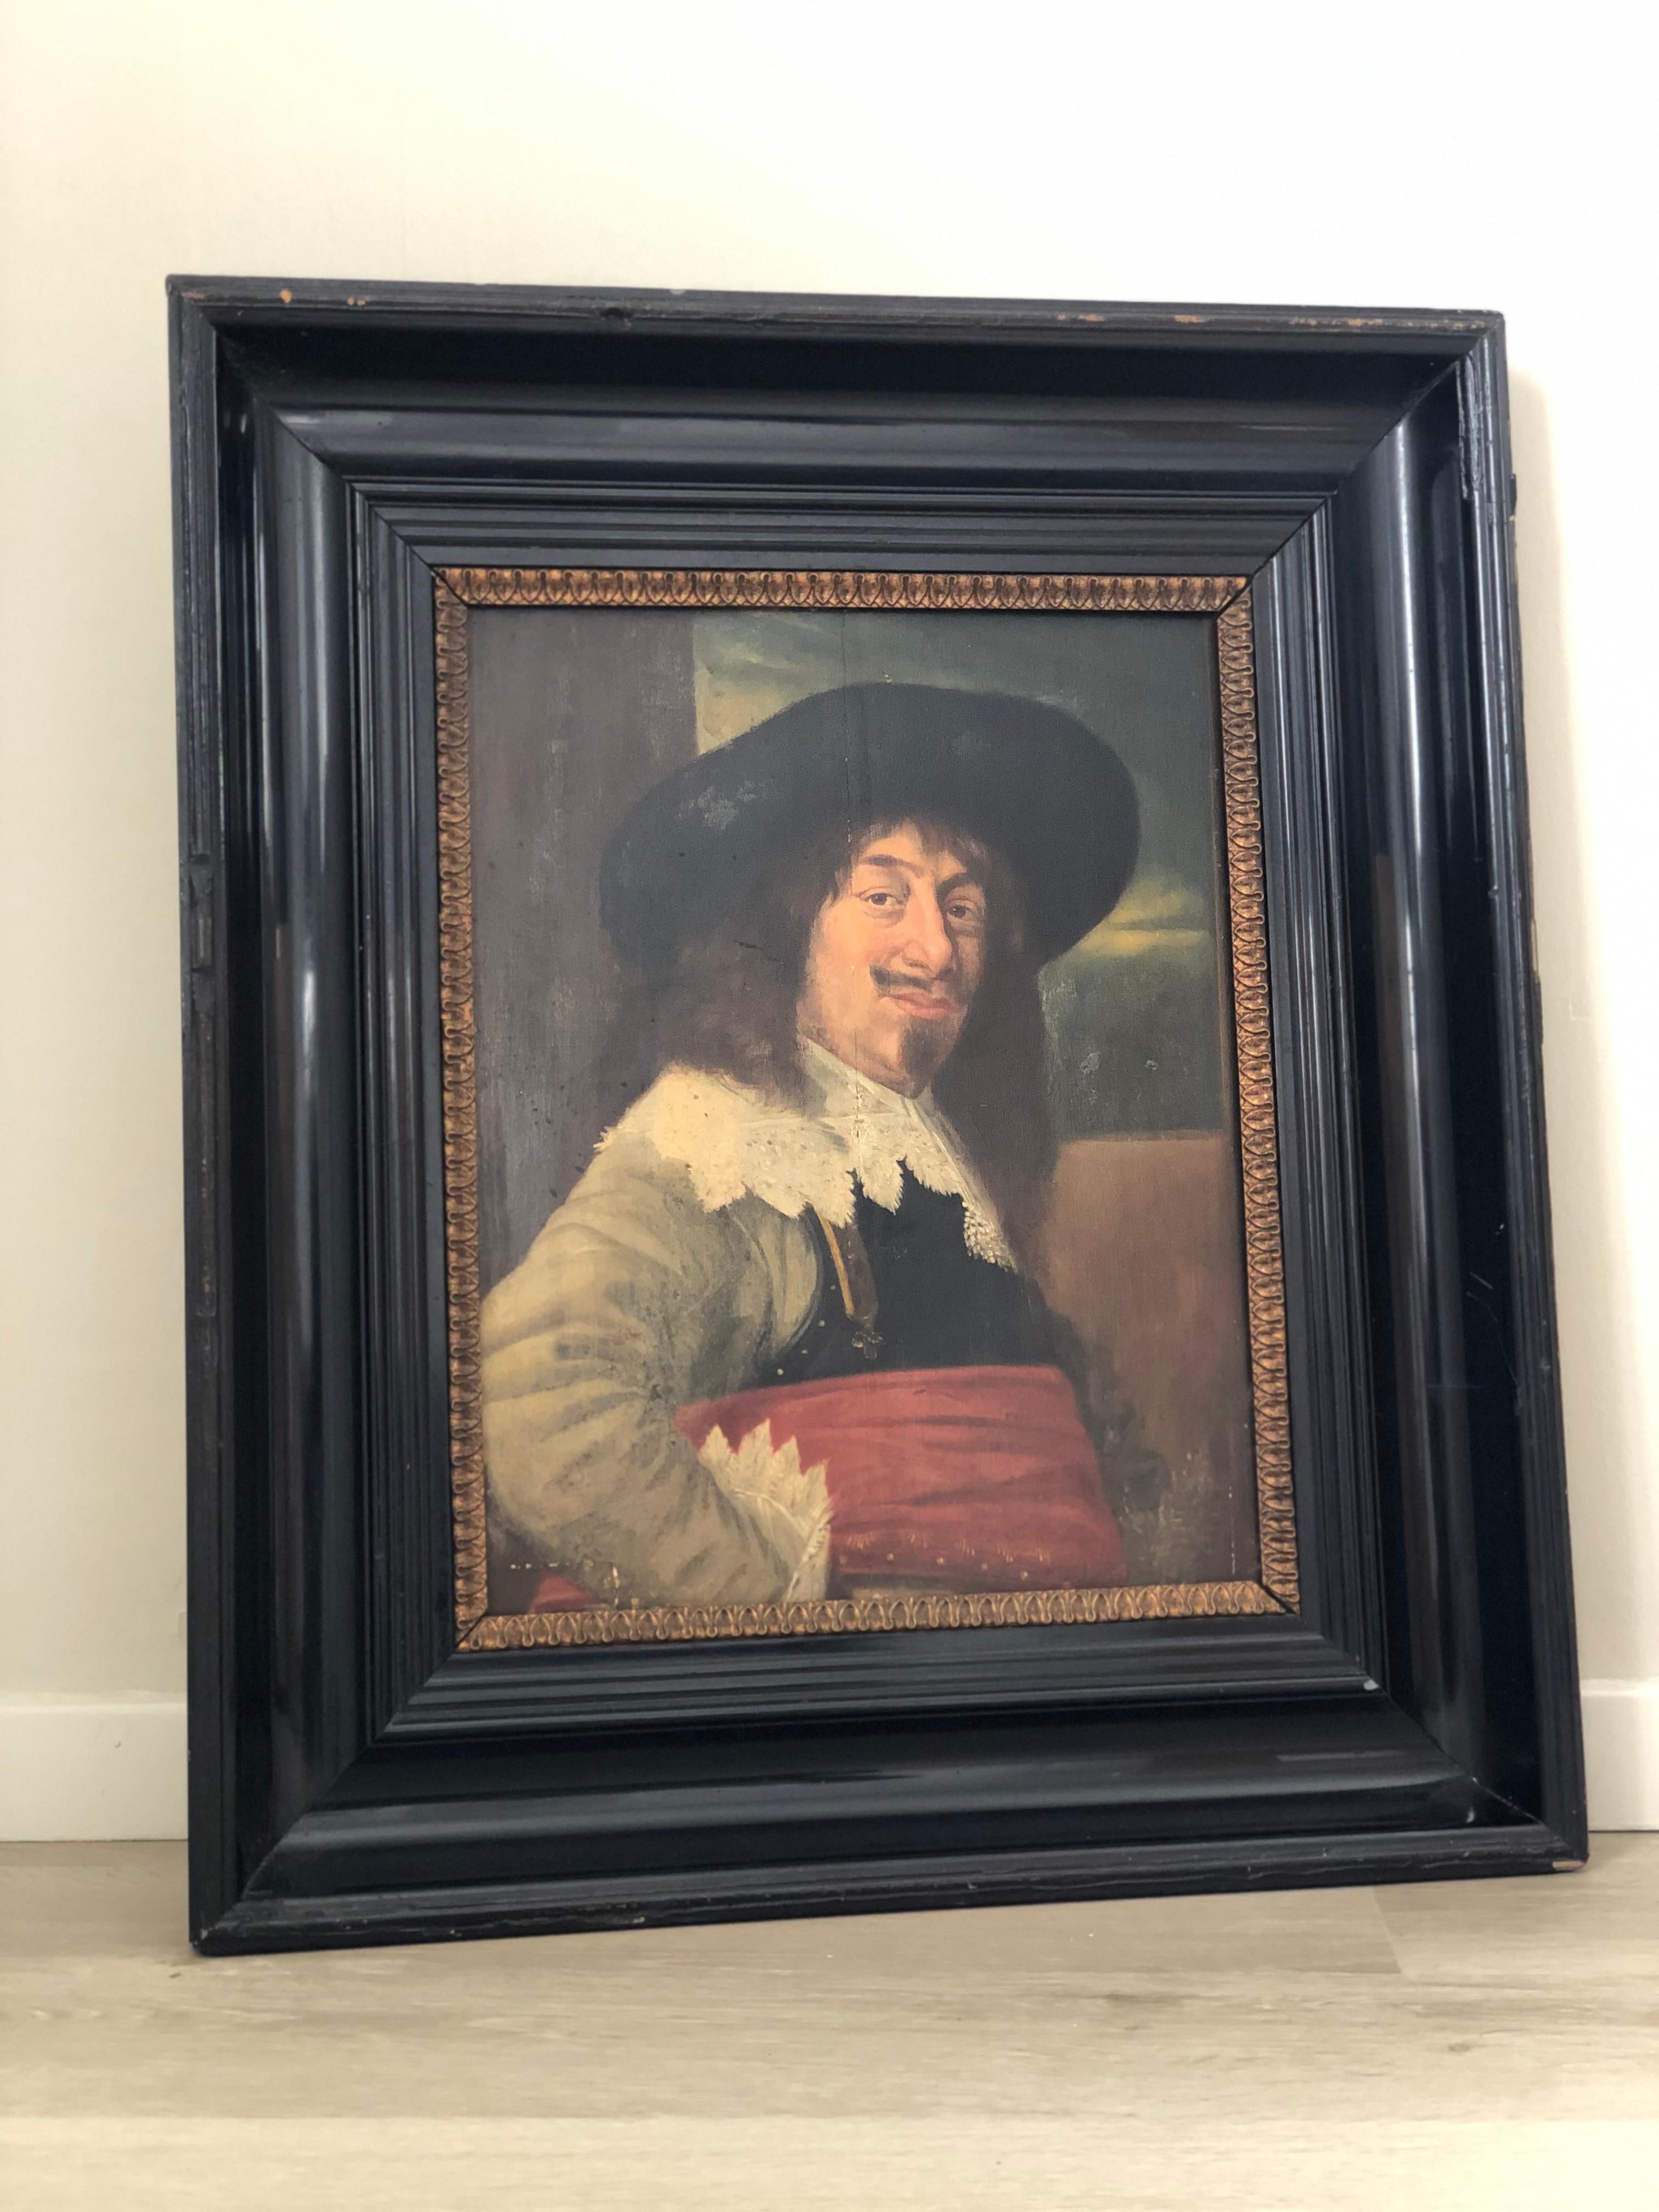 Capture a piece of Dutch history with this exquisite oil painting from the late 19th century, showcasing a distinguished Dutch man with 17th-century (Golden Age) attire. This stunning artwork transports you back in time to the Golden Age of the